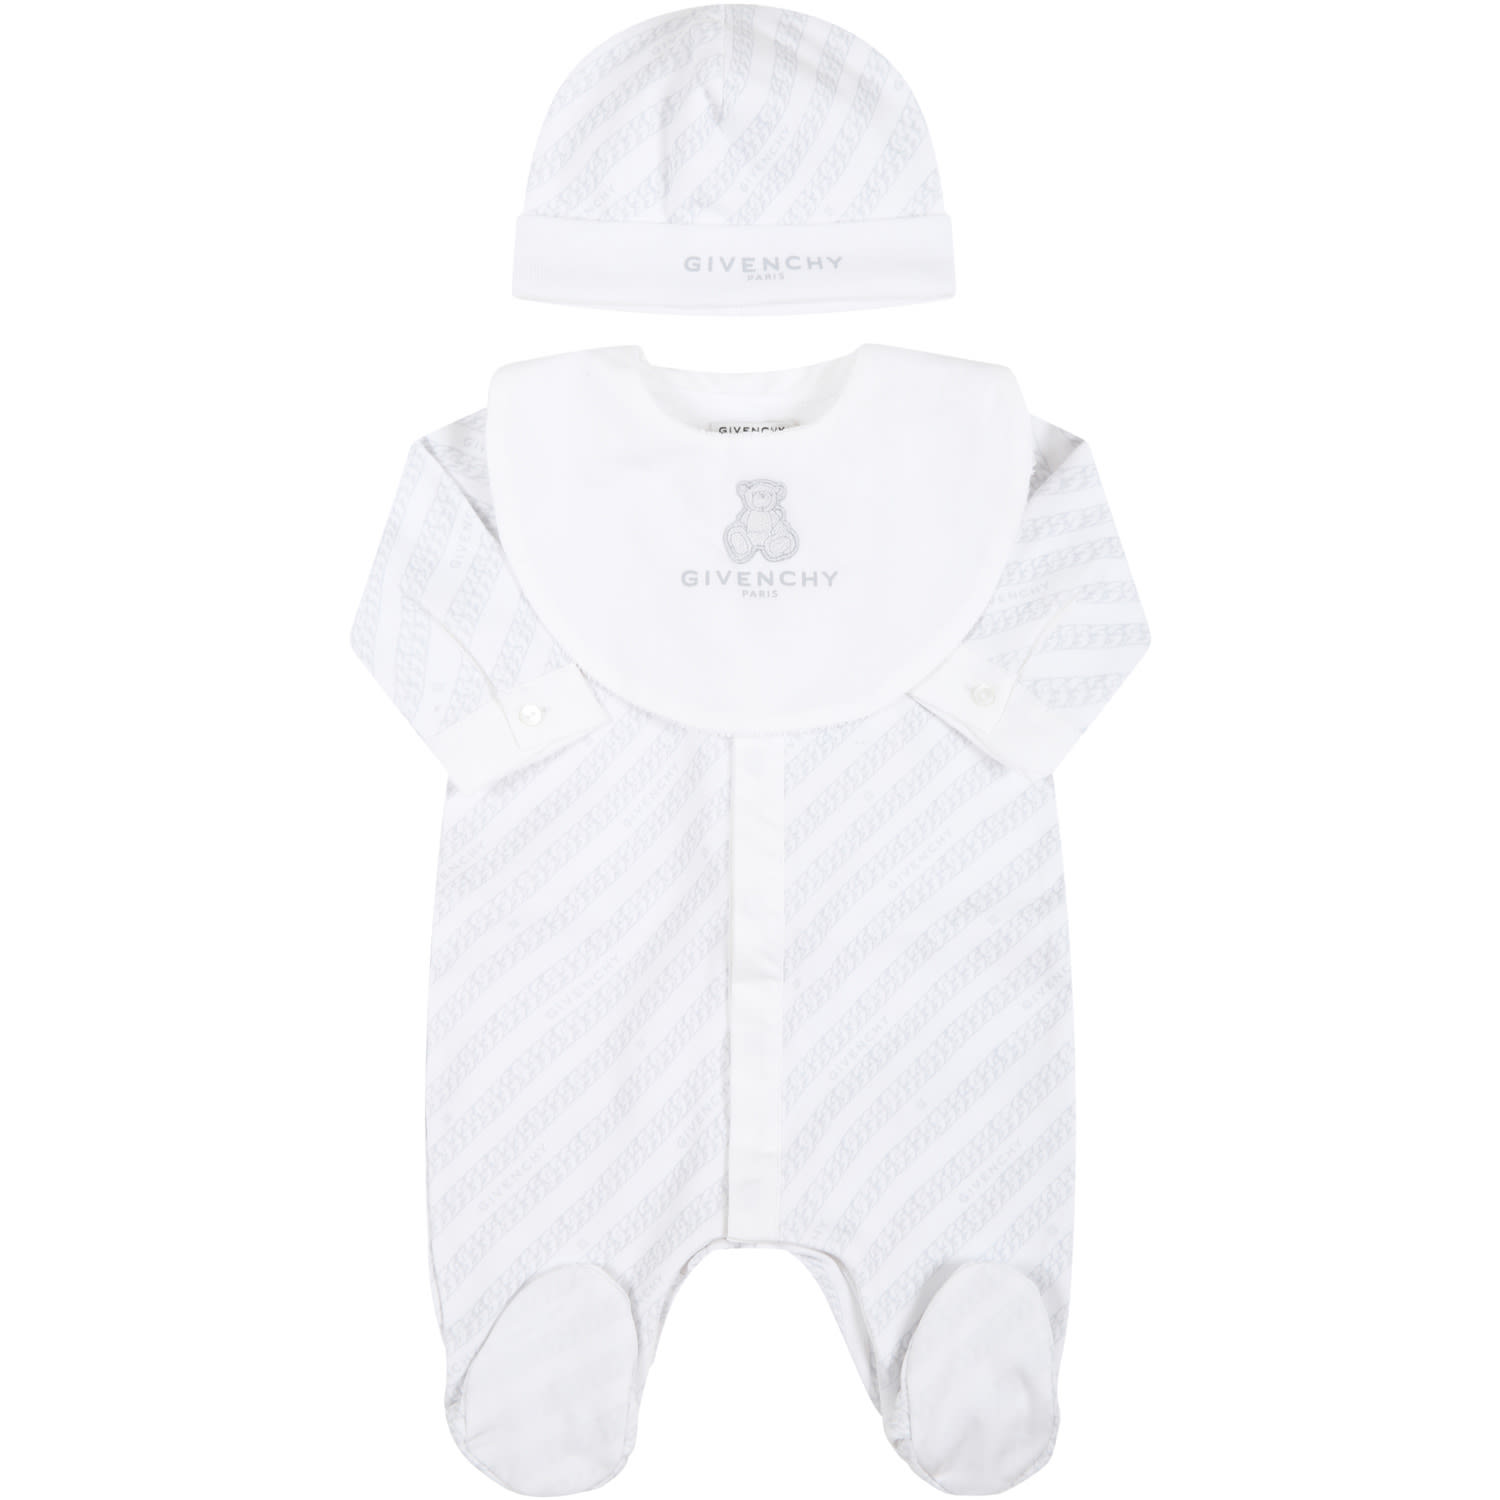 Givenchy White Set For Baby Kids With Logos